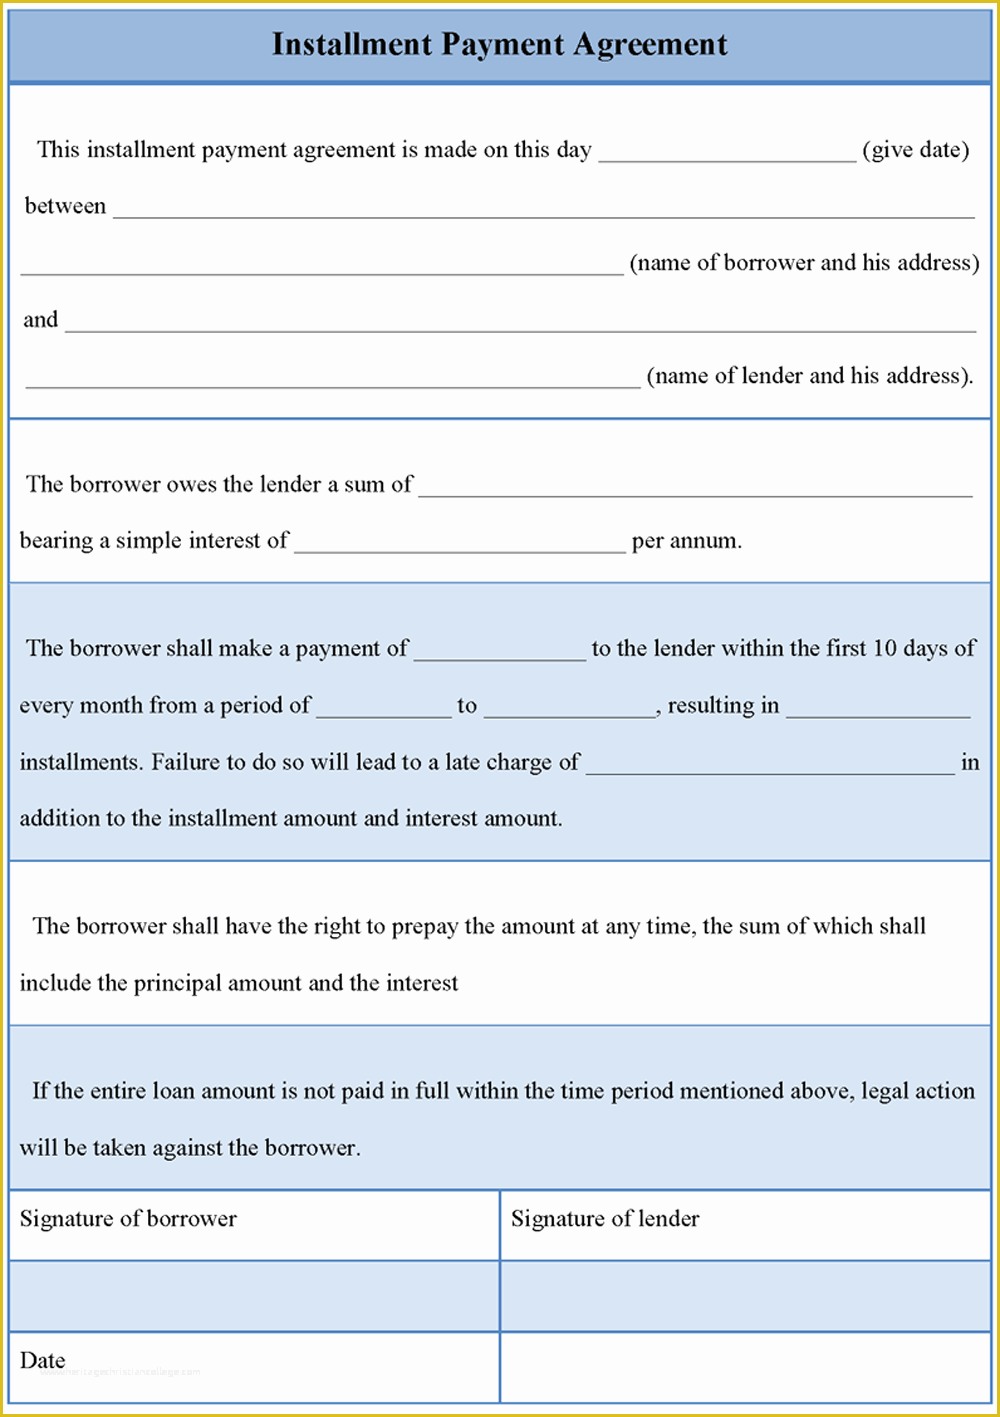 Installment Agreement Template Free Of Printable Business Installment Payment Agreement Template